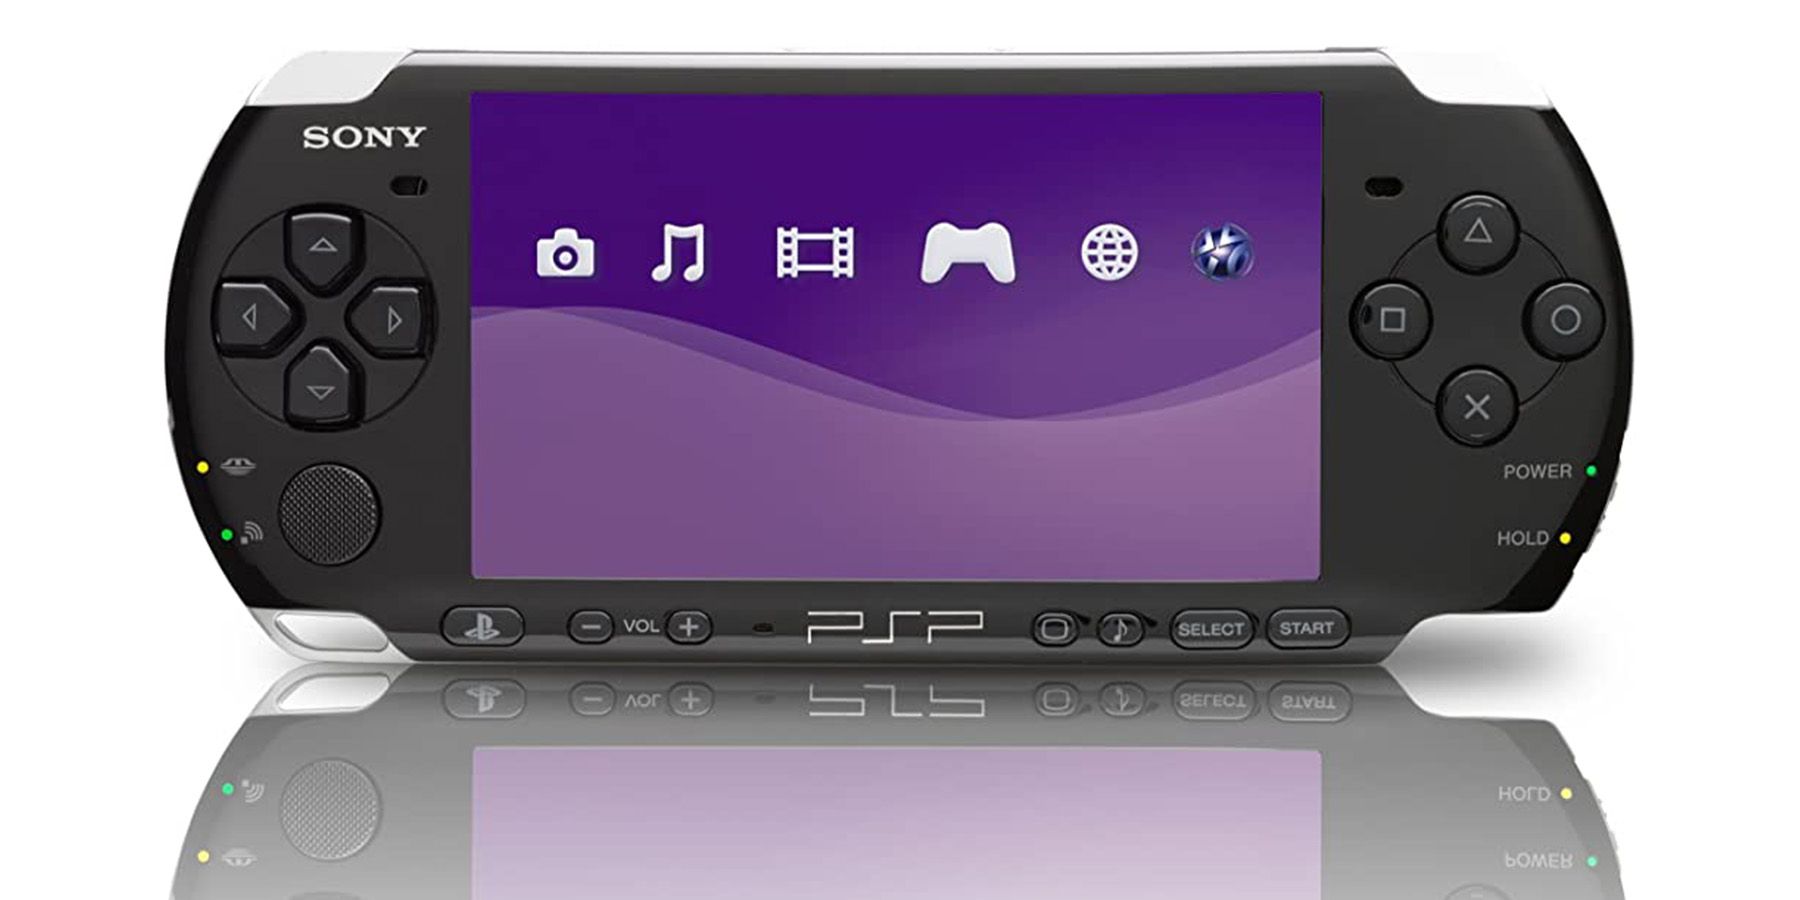 Google Engineers Hack PlayStation Portal to Run Emulated PSP Games